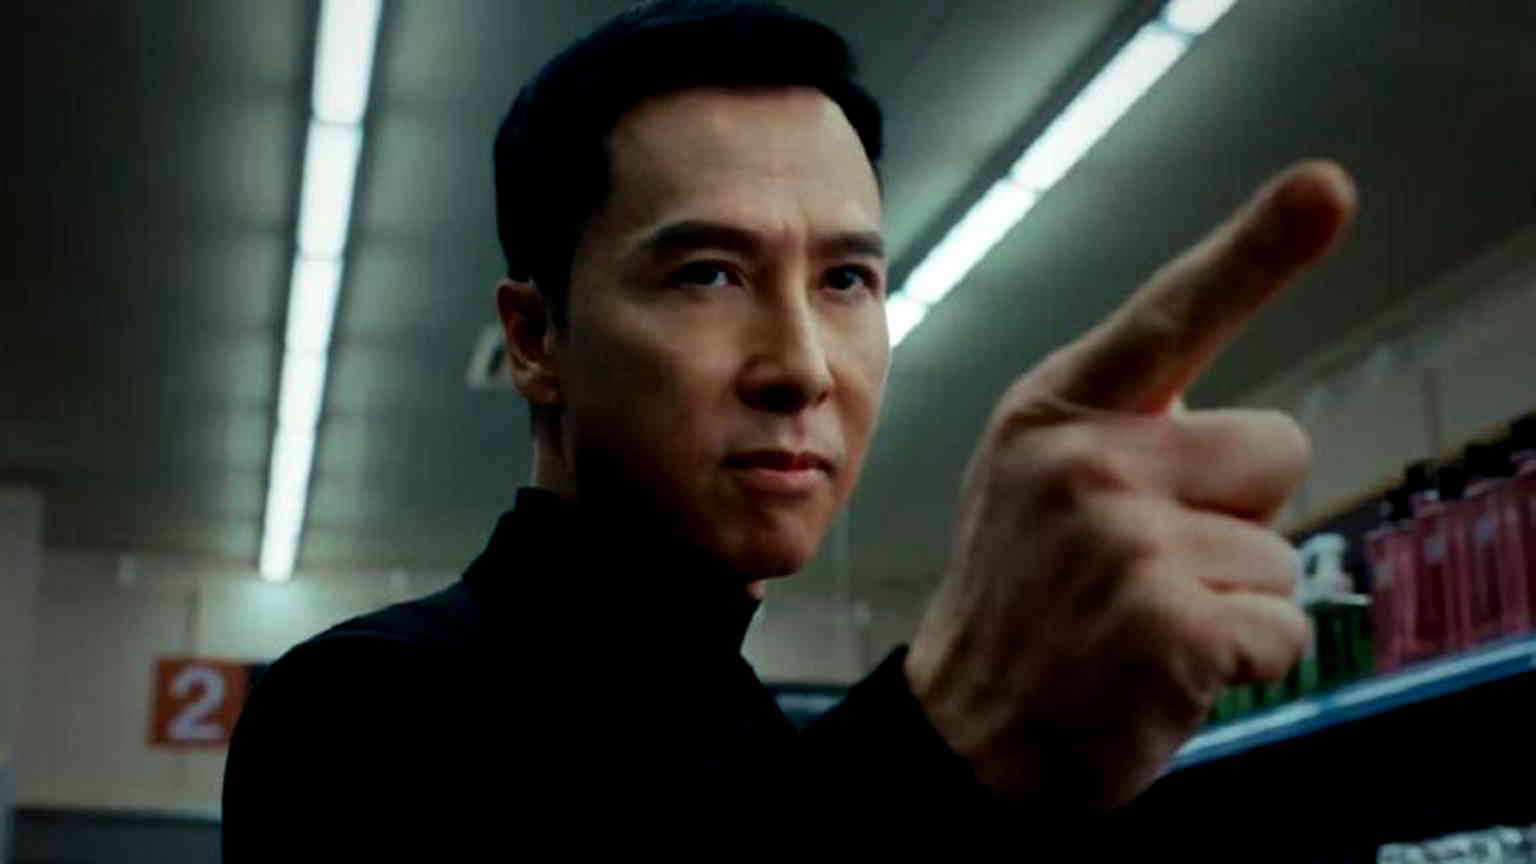 Donnie Yen protects iPhone users’ privacy in action-packed Apple ad for Chinese market